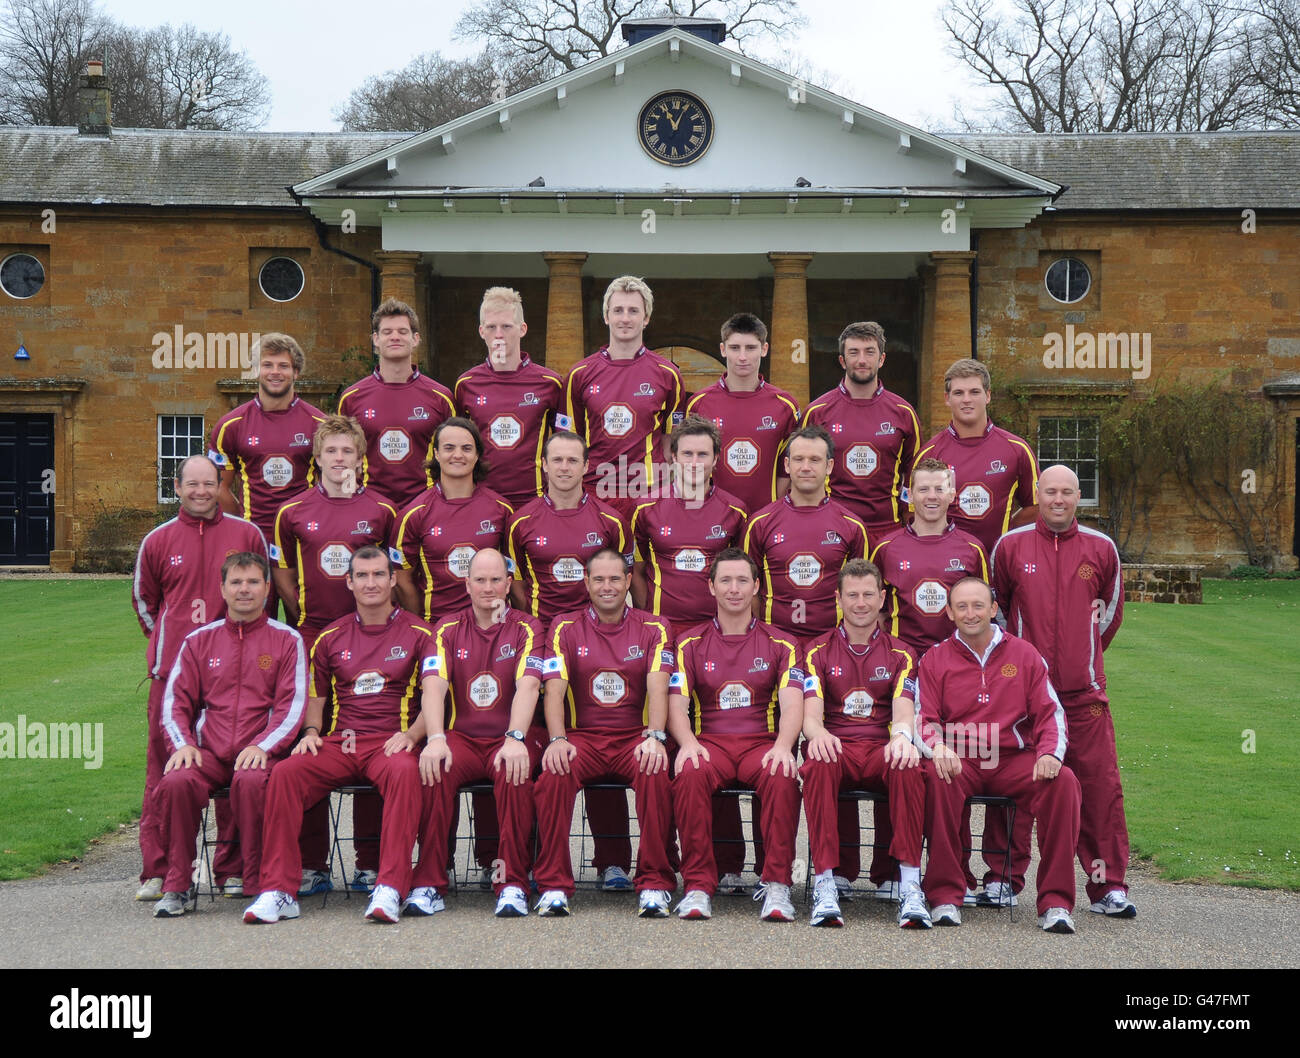 Cricket - Liverpool Victoria County Championship - Division due - Northamptonshire CCC Photocall 2011 - Althorp House Foto Stock